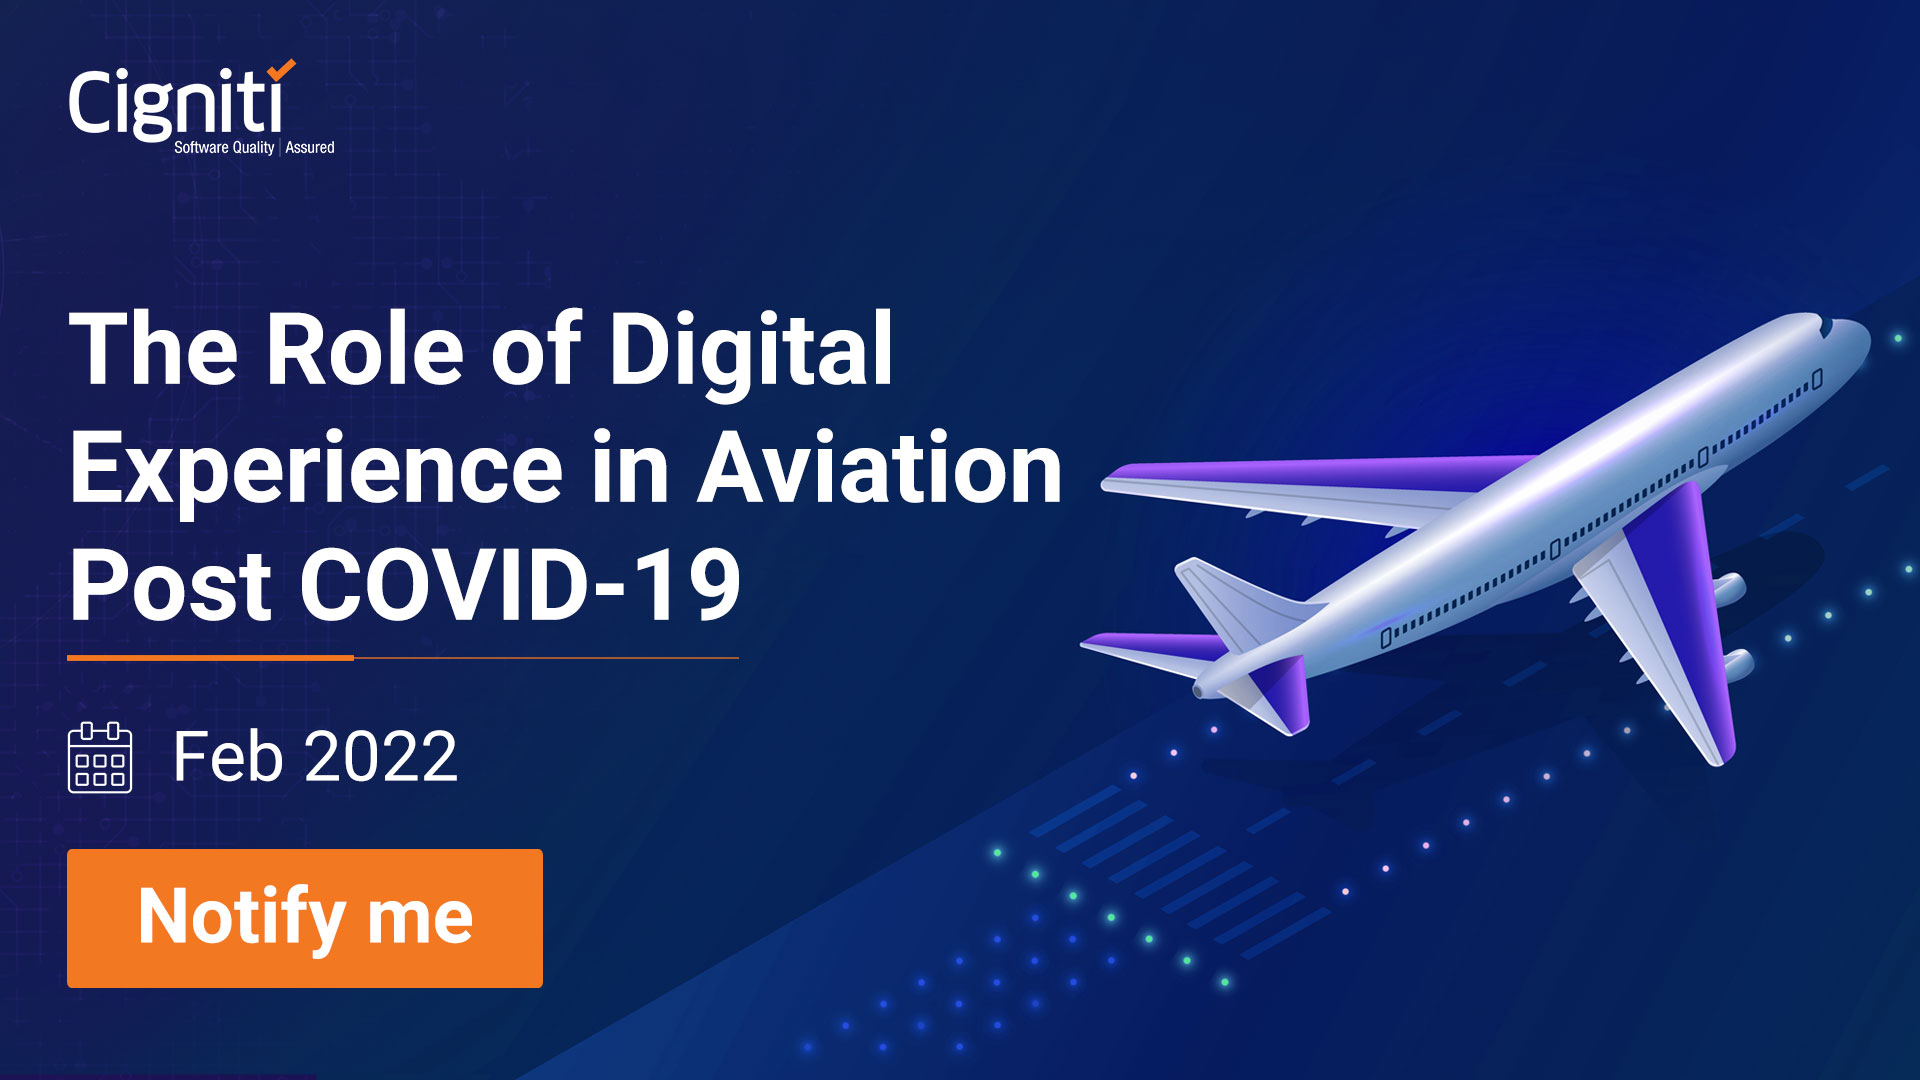 The Role of Digital Experience in Aviation Post COVID-19